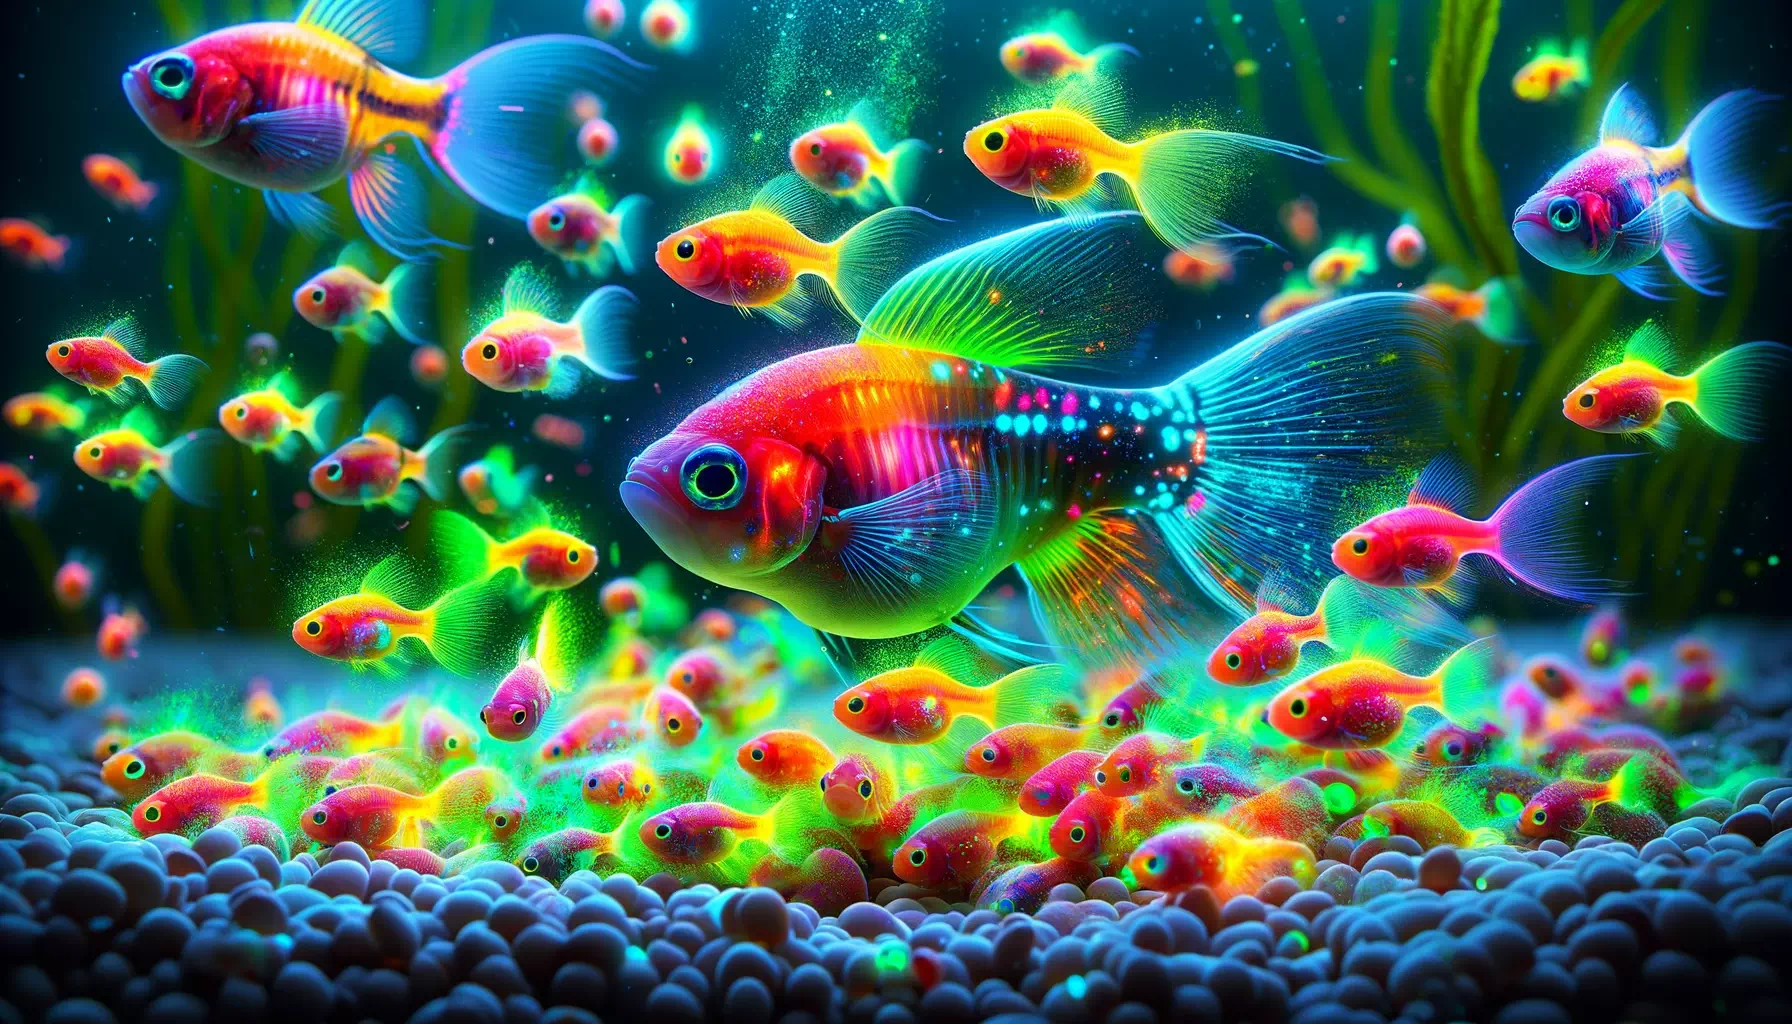 depicting GloFish with their offspring, highlighting the inheritance of bright colors. Visualize a scene underwater with several adult GloFis